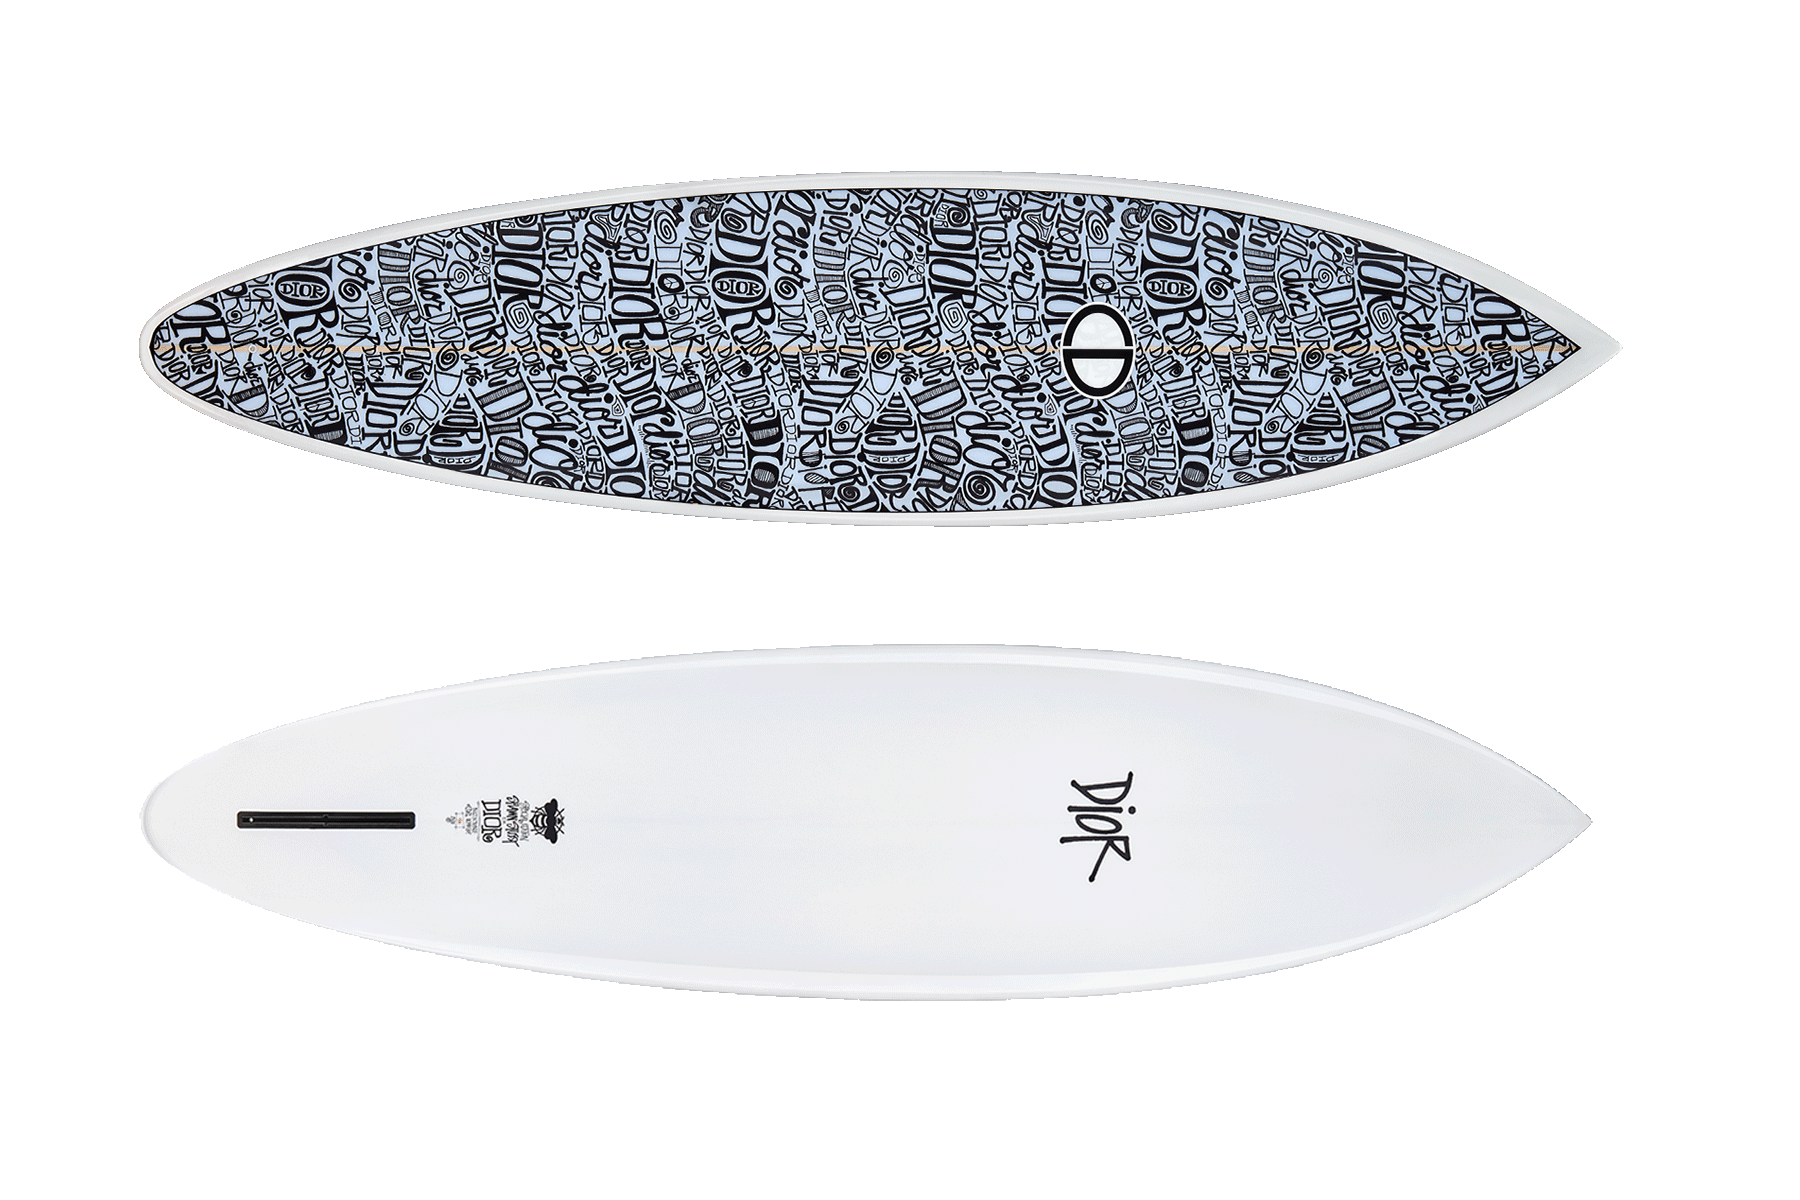 This Limited Edition Dior X Stussy Surfboard Is Catching Waves On The Net